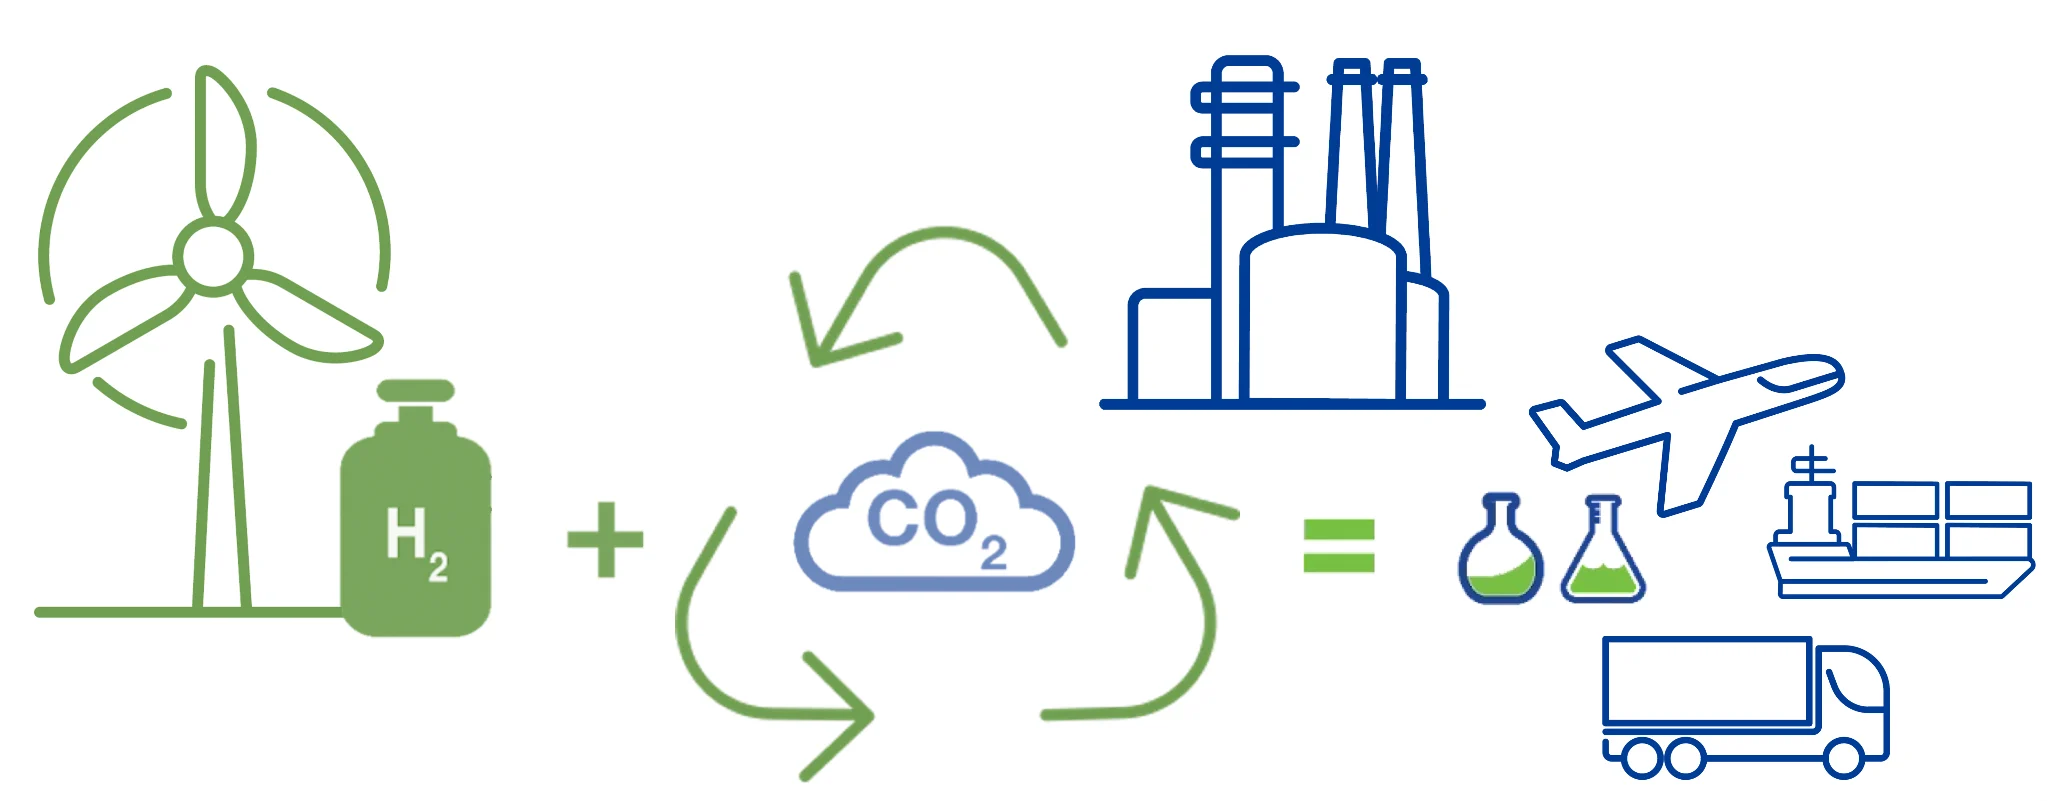 Neste 4 ways CO2  is valuable as a raw material